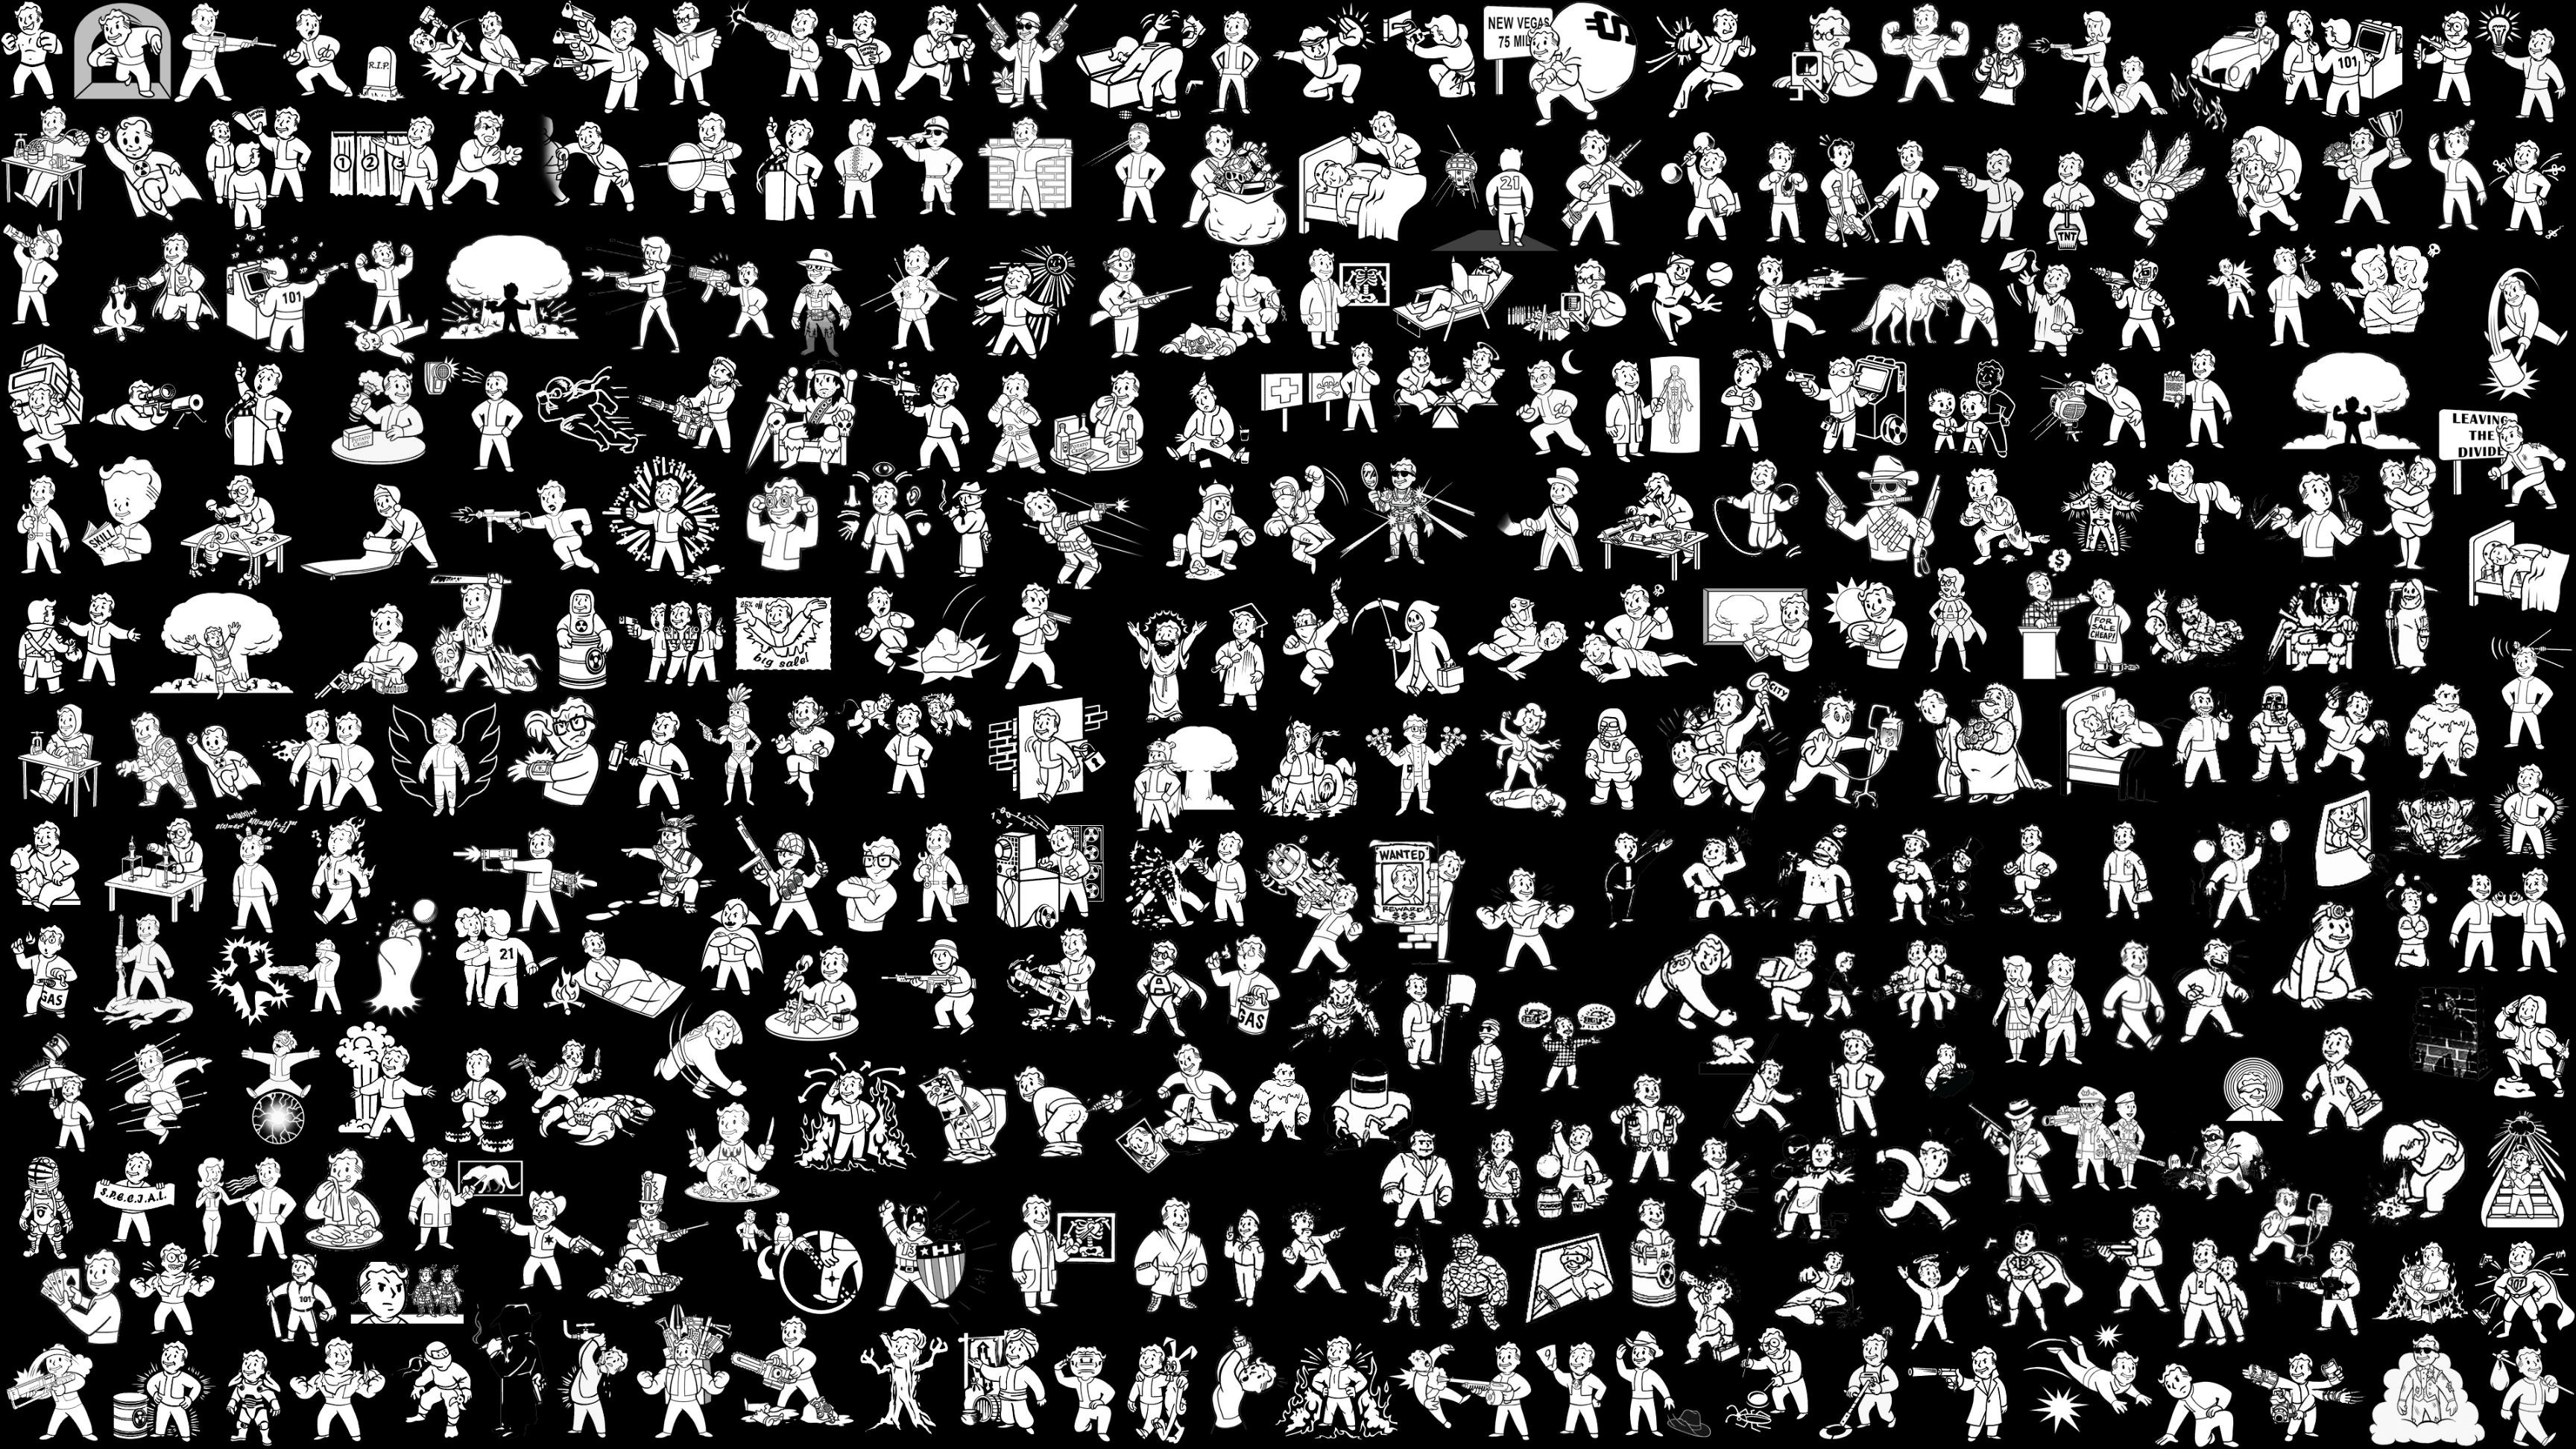 General 3456x1944 Fallout Vault Boy video games monochrome PC gaming collage DeviantArt video game art